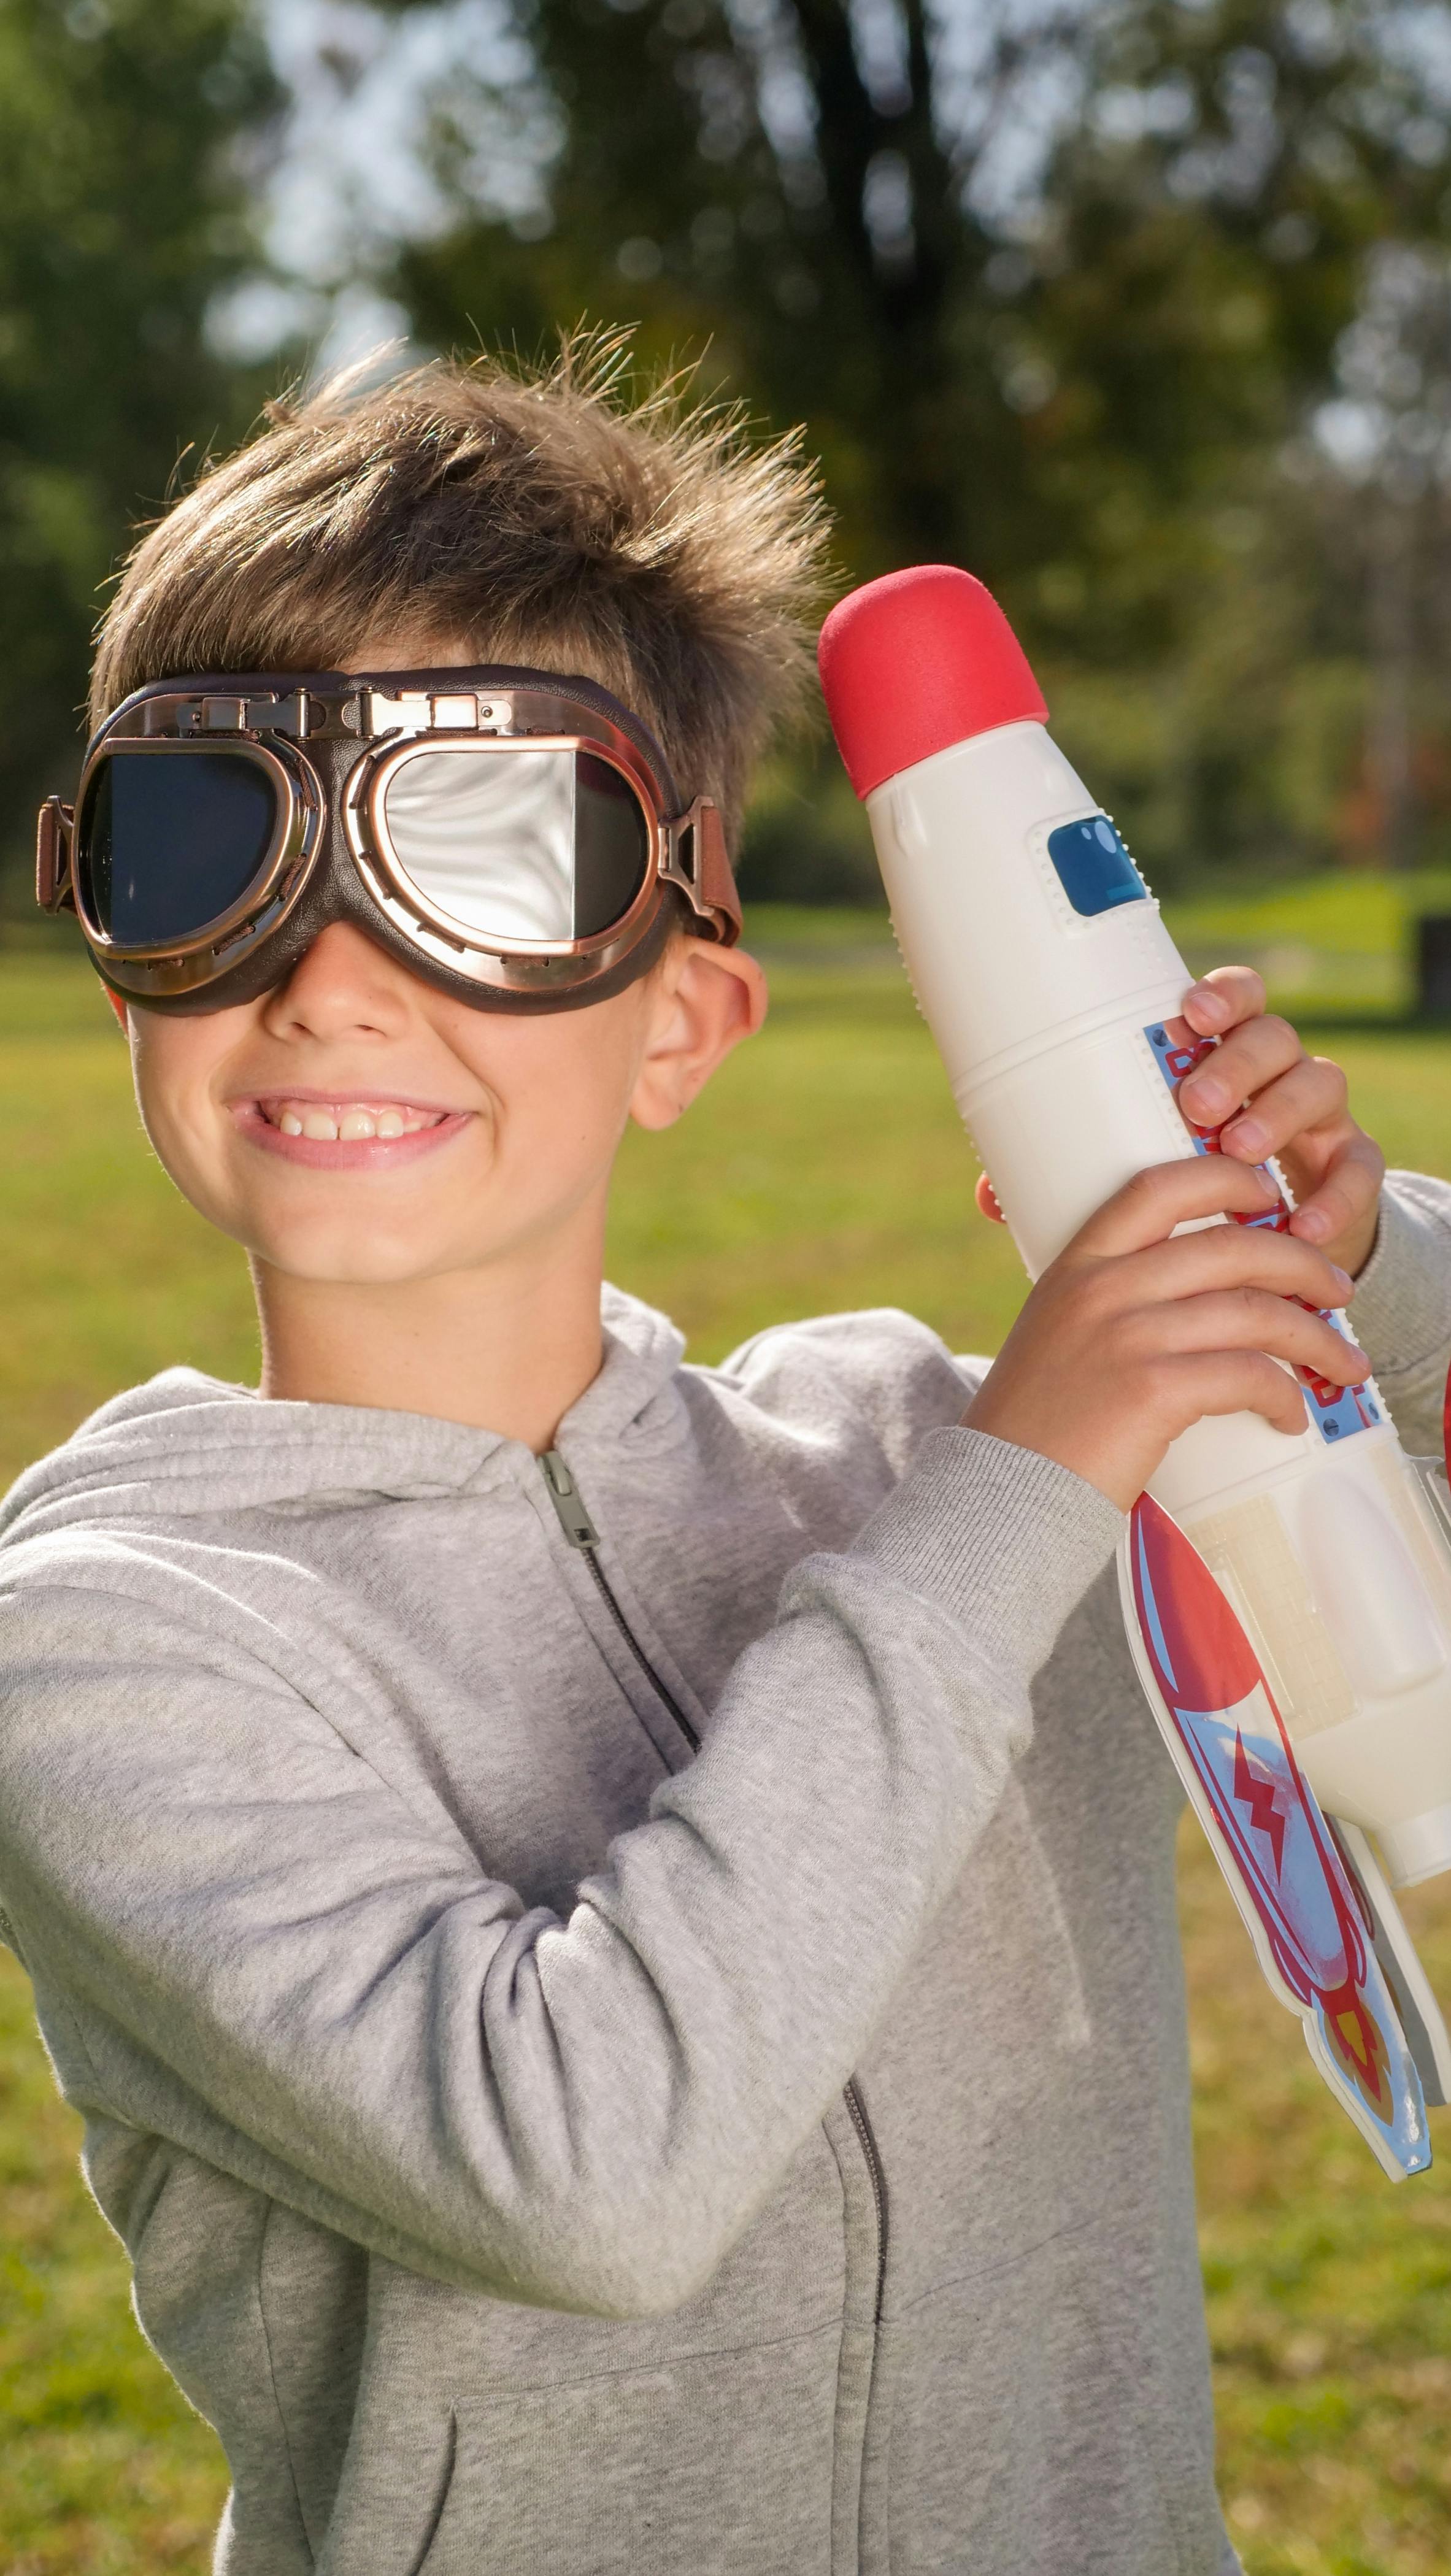 smiling young boy holding a toy rocket